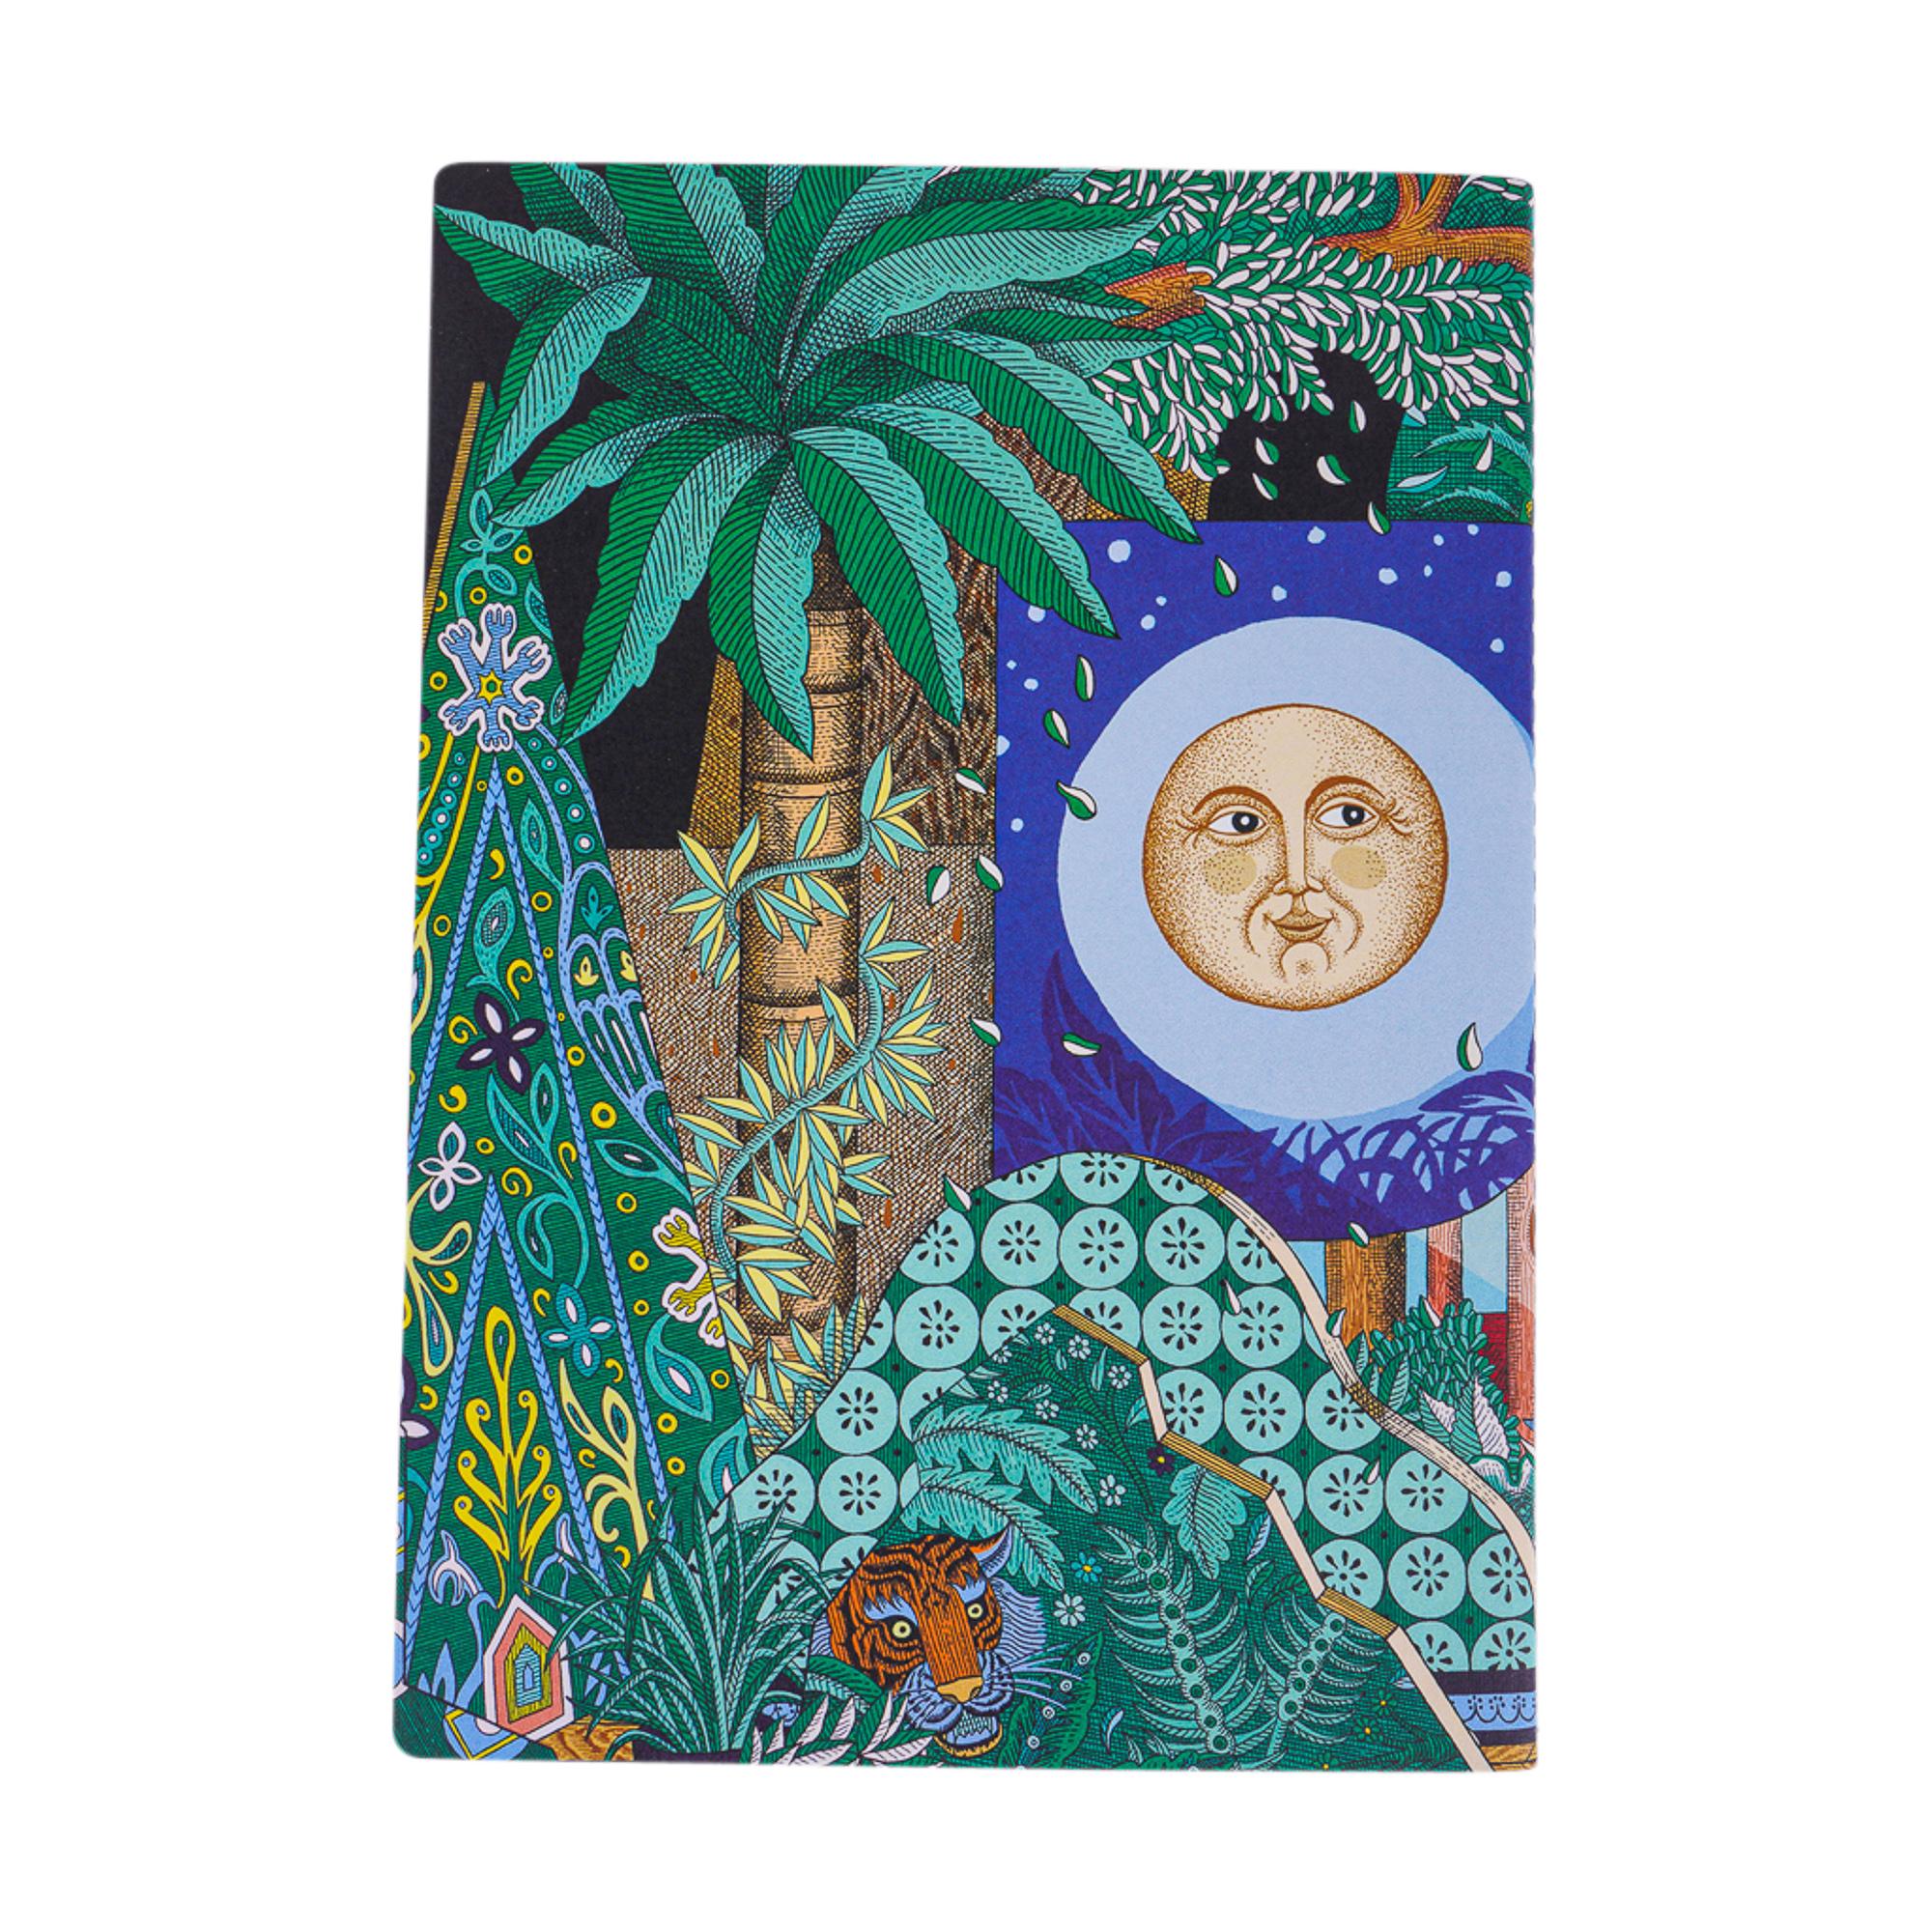 Mightychic offers a charming Hermes Galerie des Reves (Gallery of Dreams) Box Set of Six Notebooks.
The collection is inspired by the Hermes scarf designs using the original silk designs.
Each notebook has unique formats and pages to use to let your